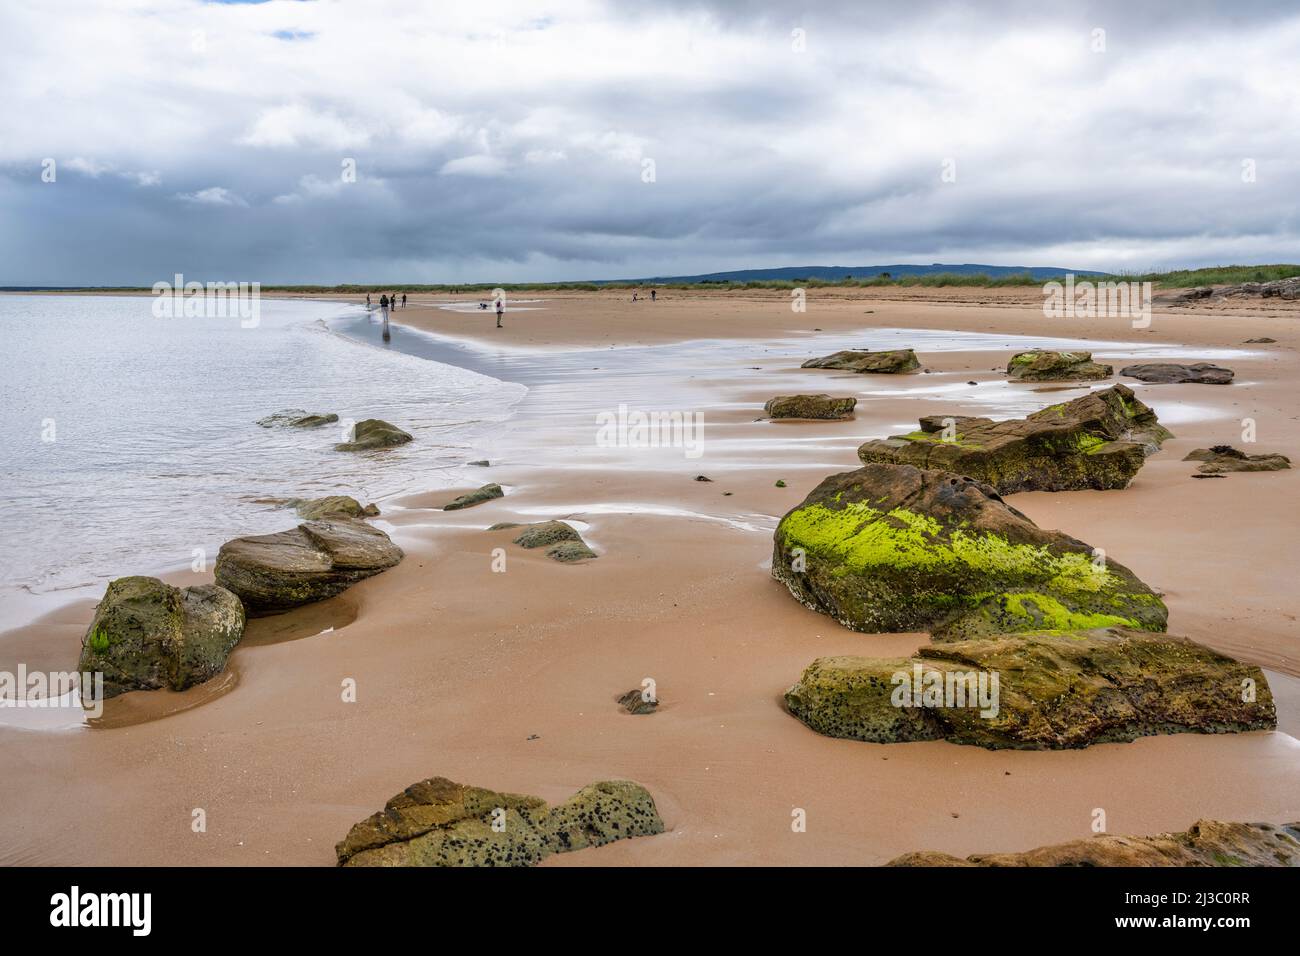 Rocks uncovered by the retreating tide on Dornoch beach in Sutherland, Highland, Scotland, UK Stock Photo